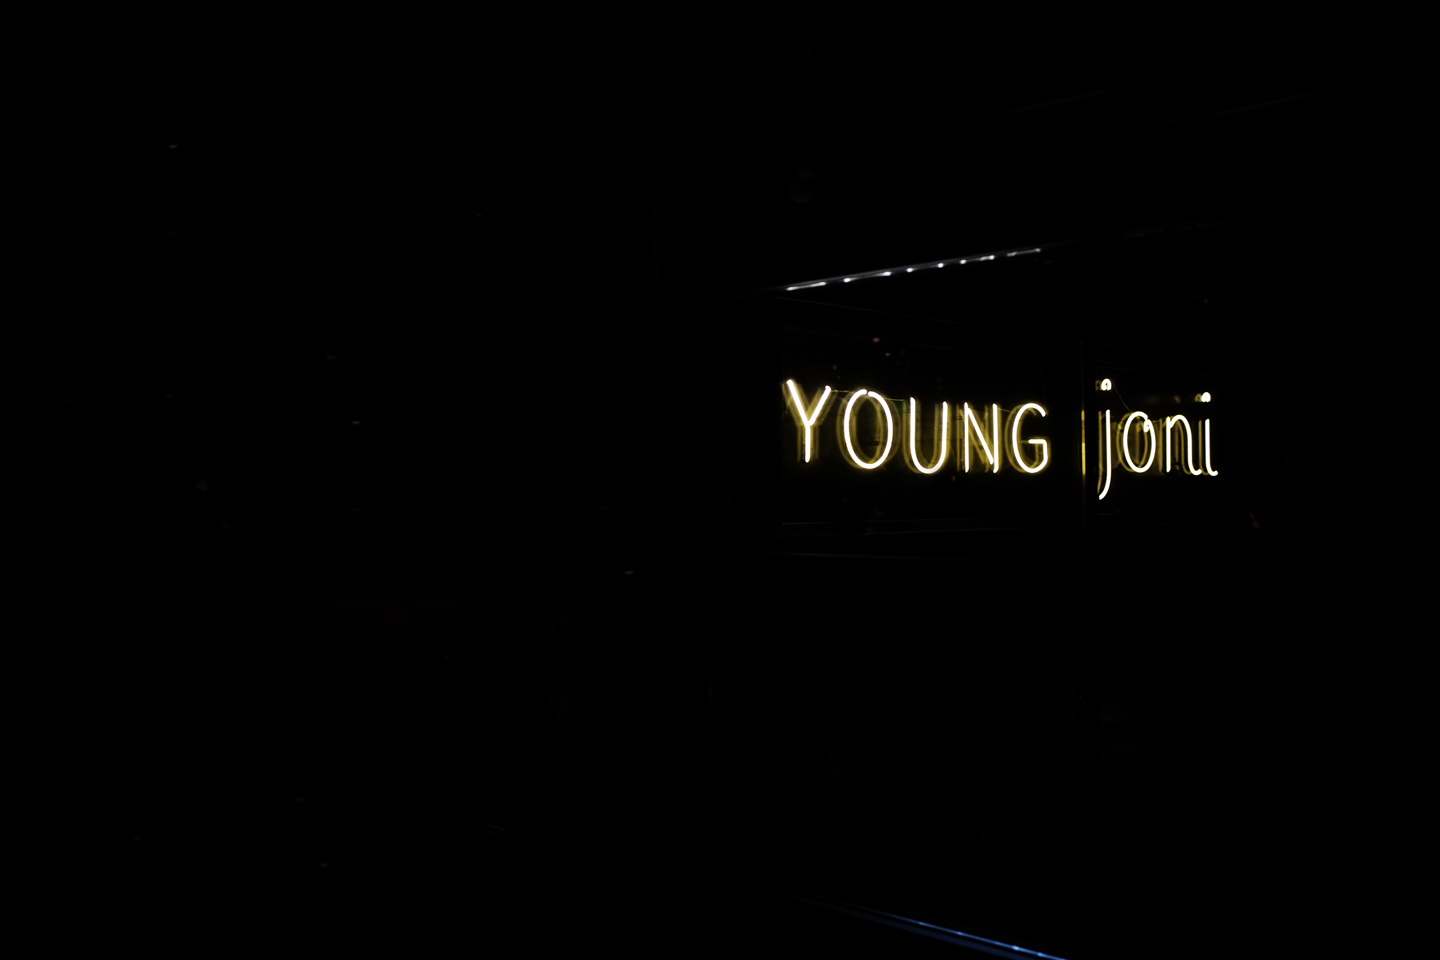 Young Joni neon sign | The Restaurant Project